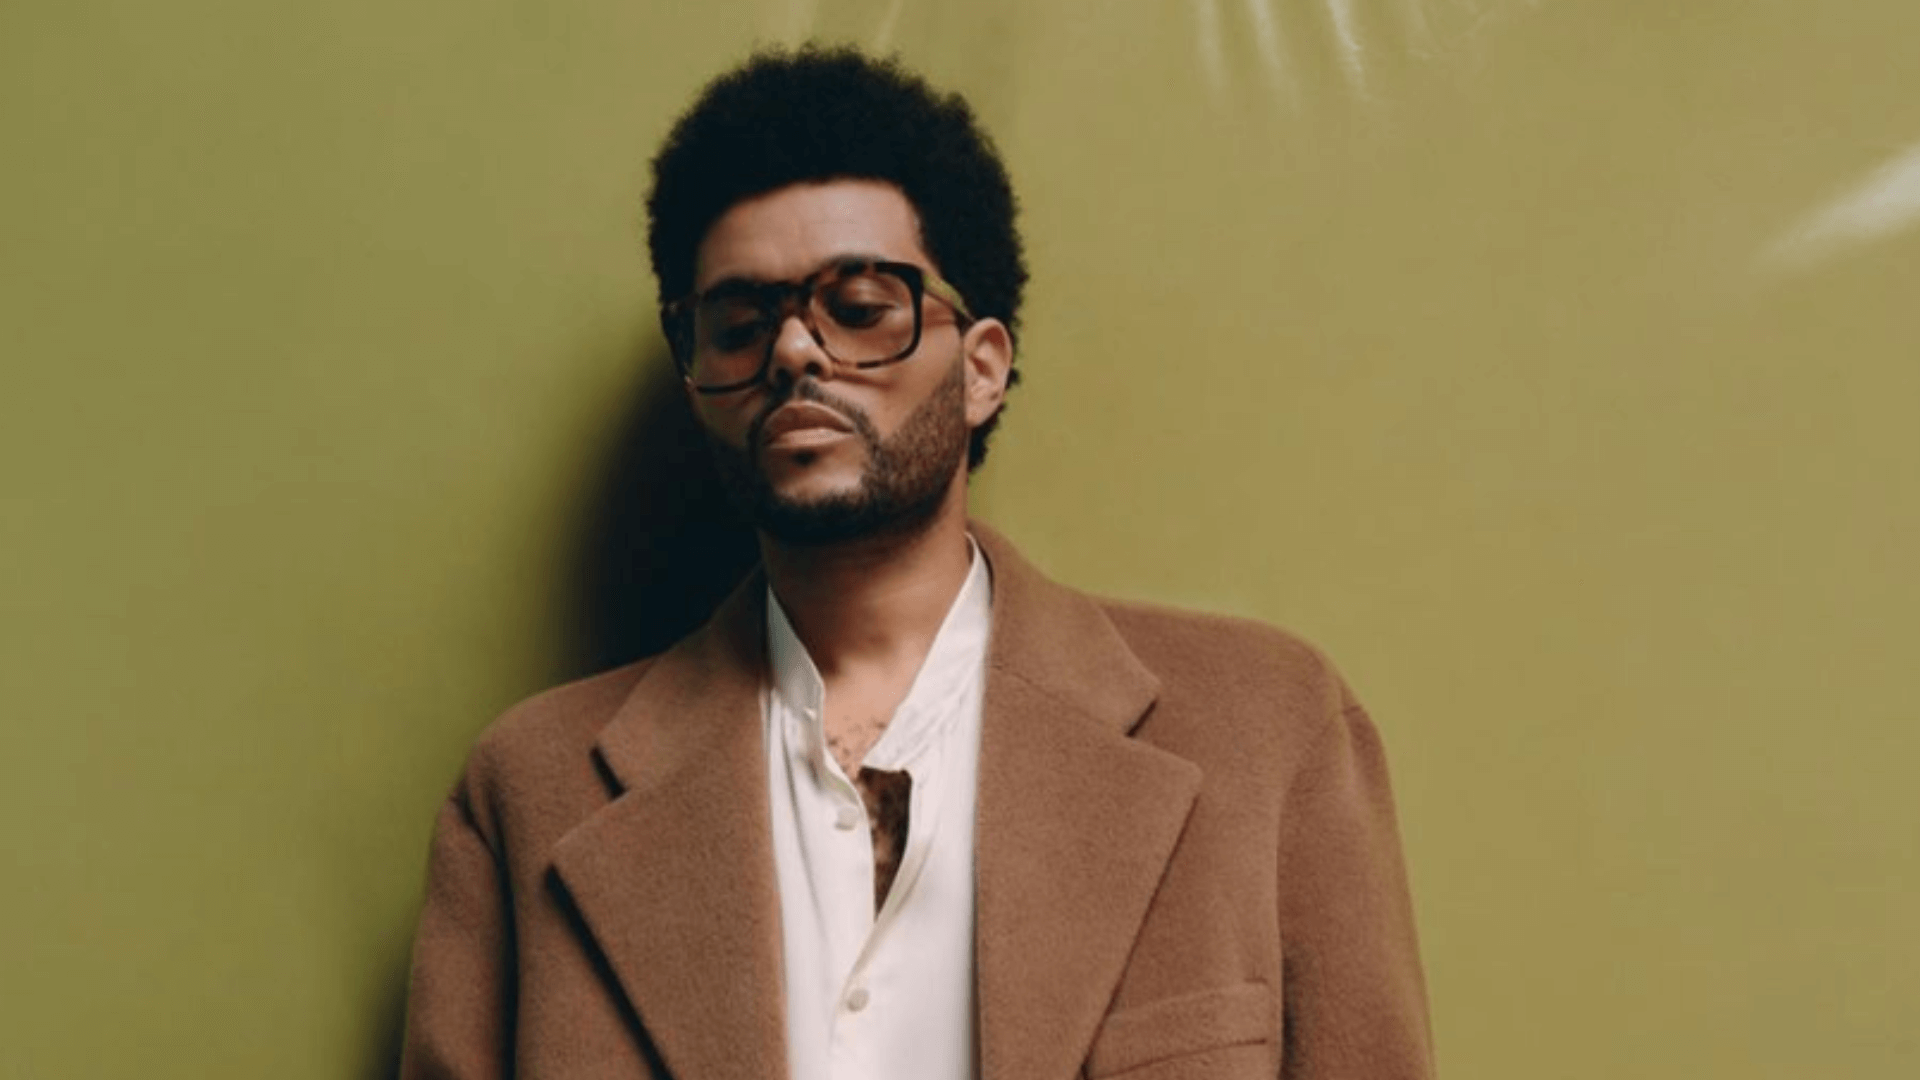 The Weeknd officially changes his name on his social media